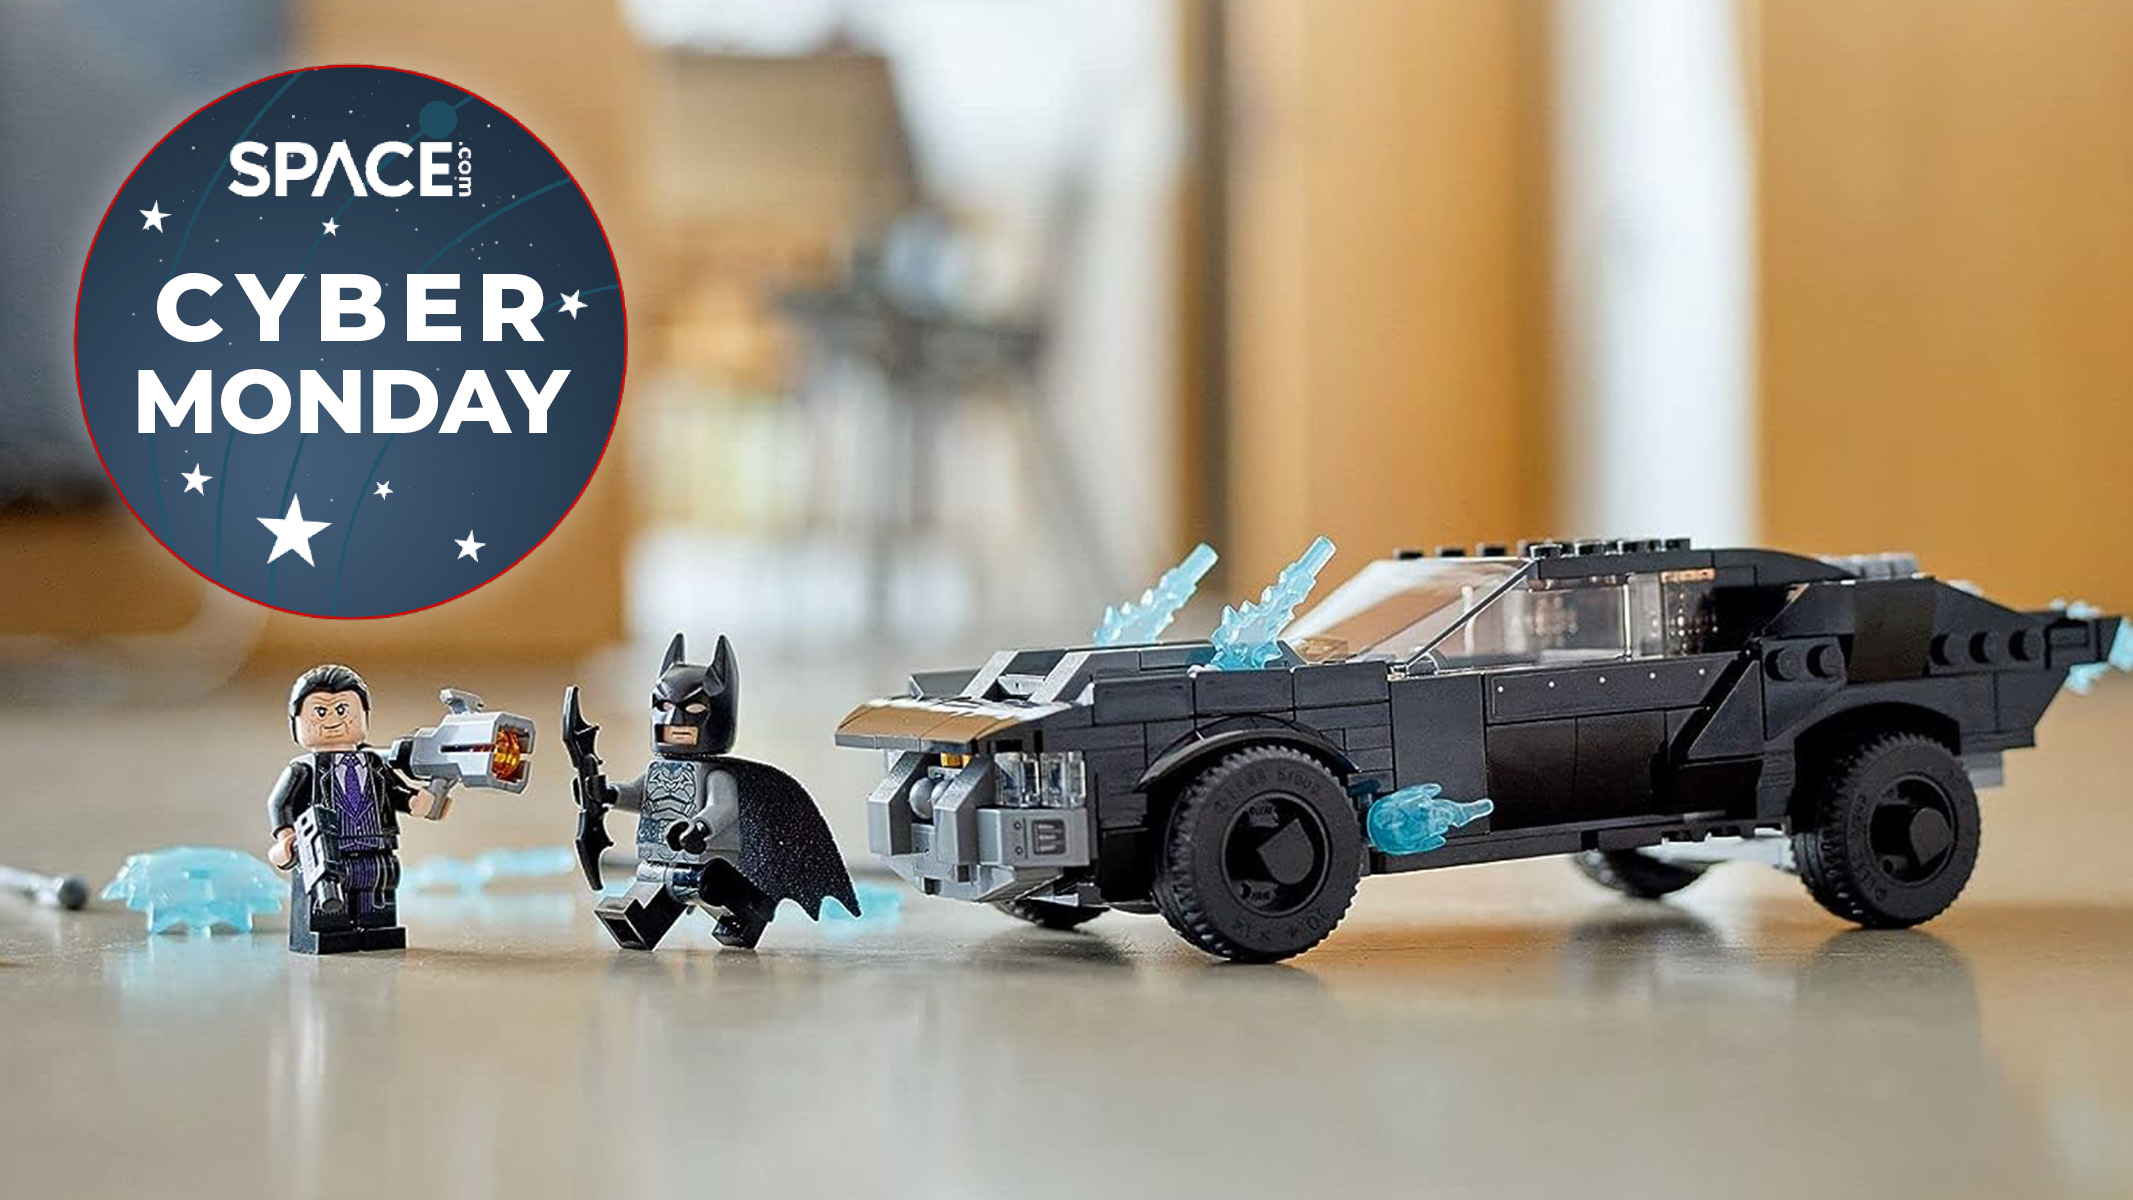 Get this Lego Batmobile for less than $25 in Amazon’s Cyber Monday deal Space